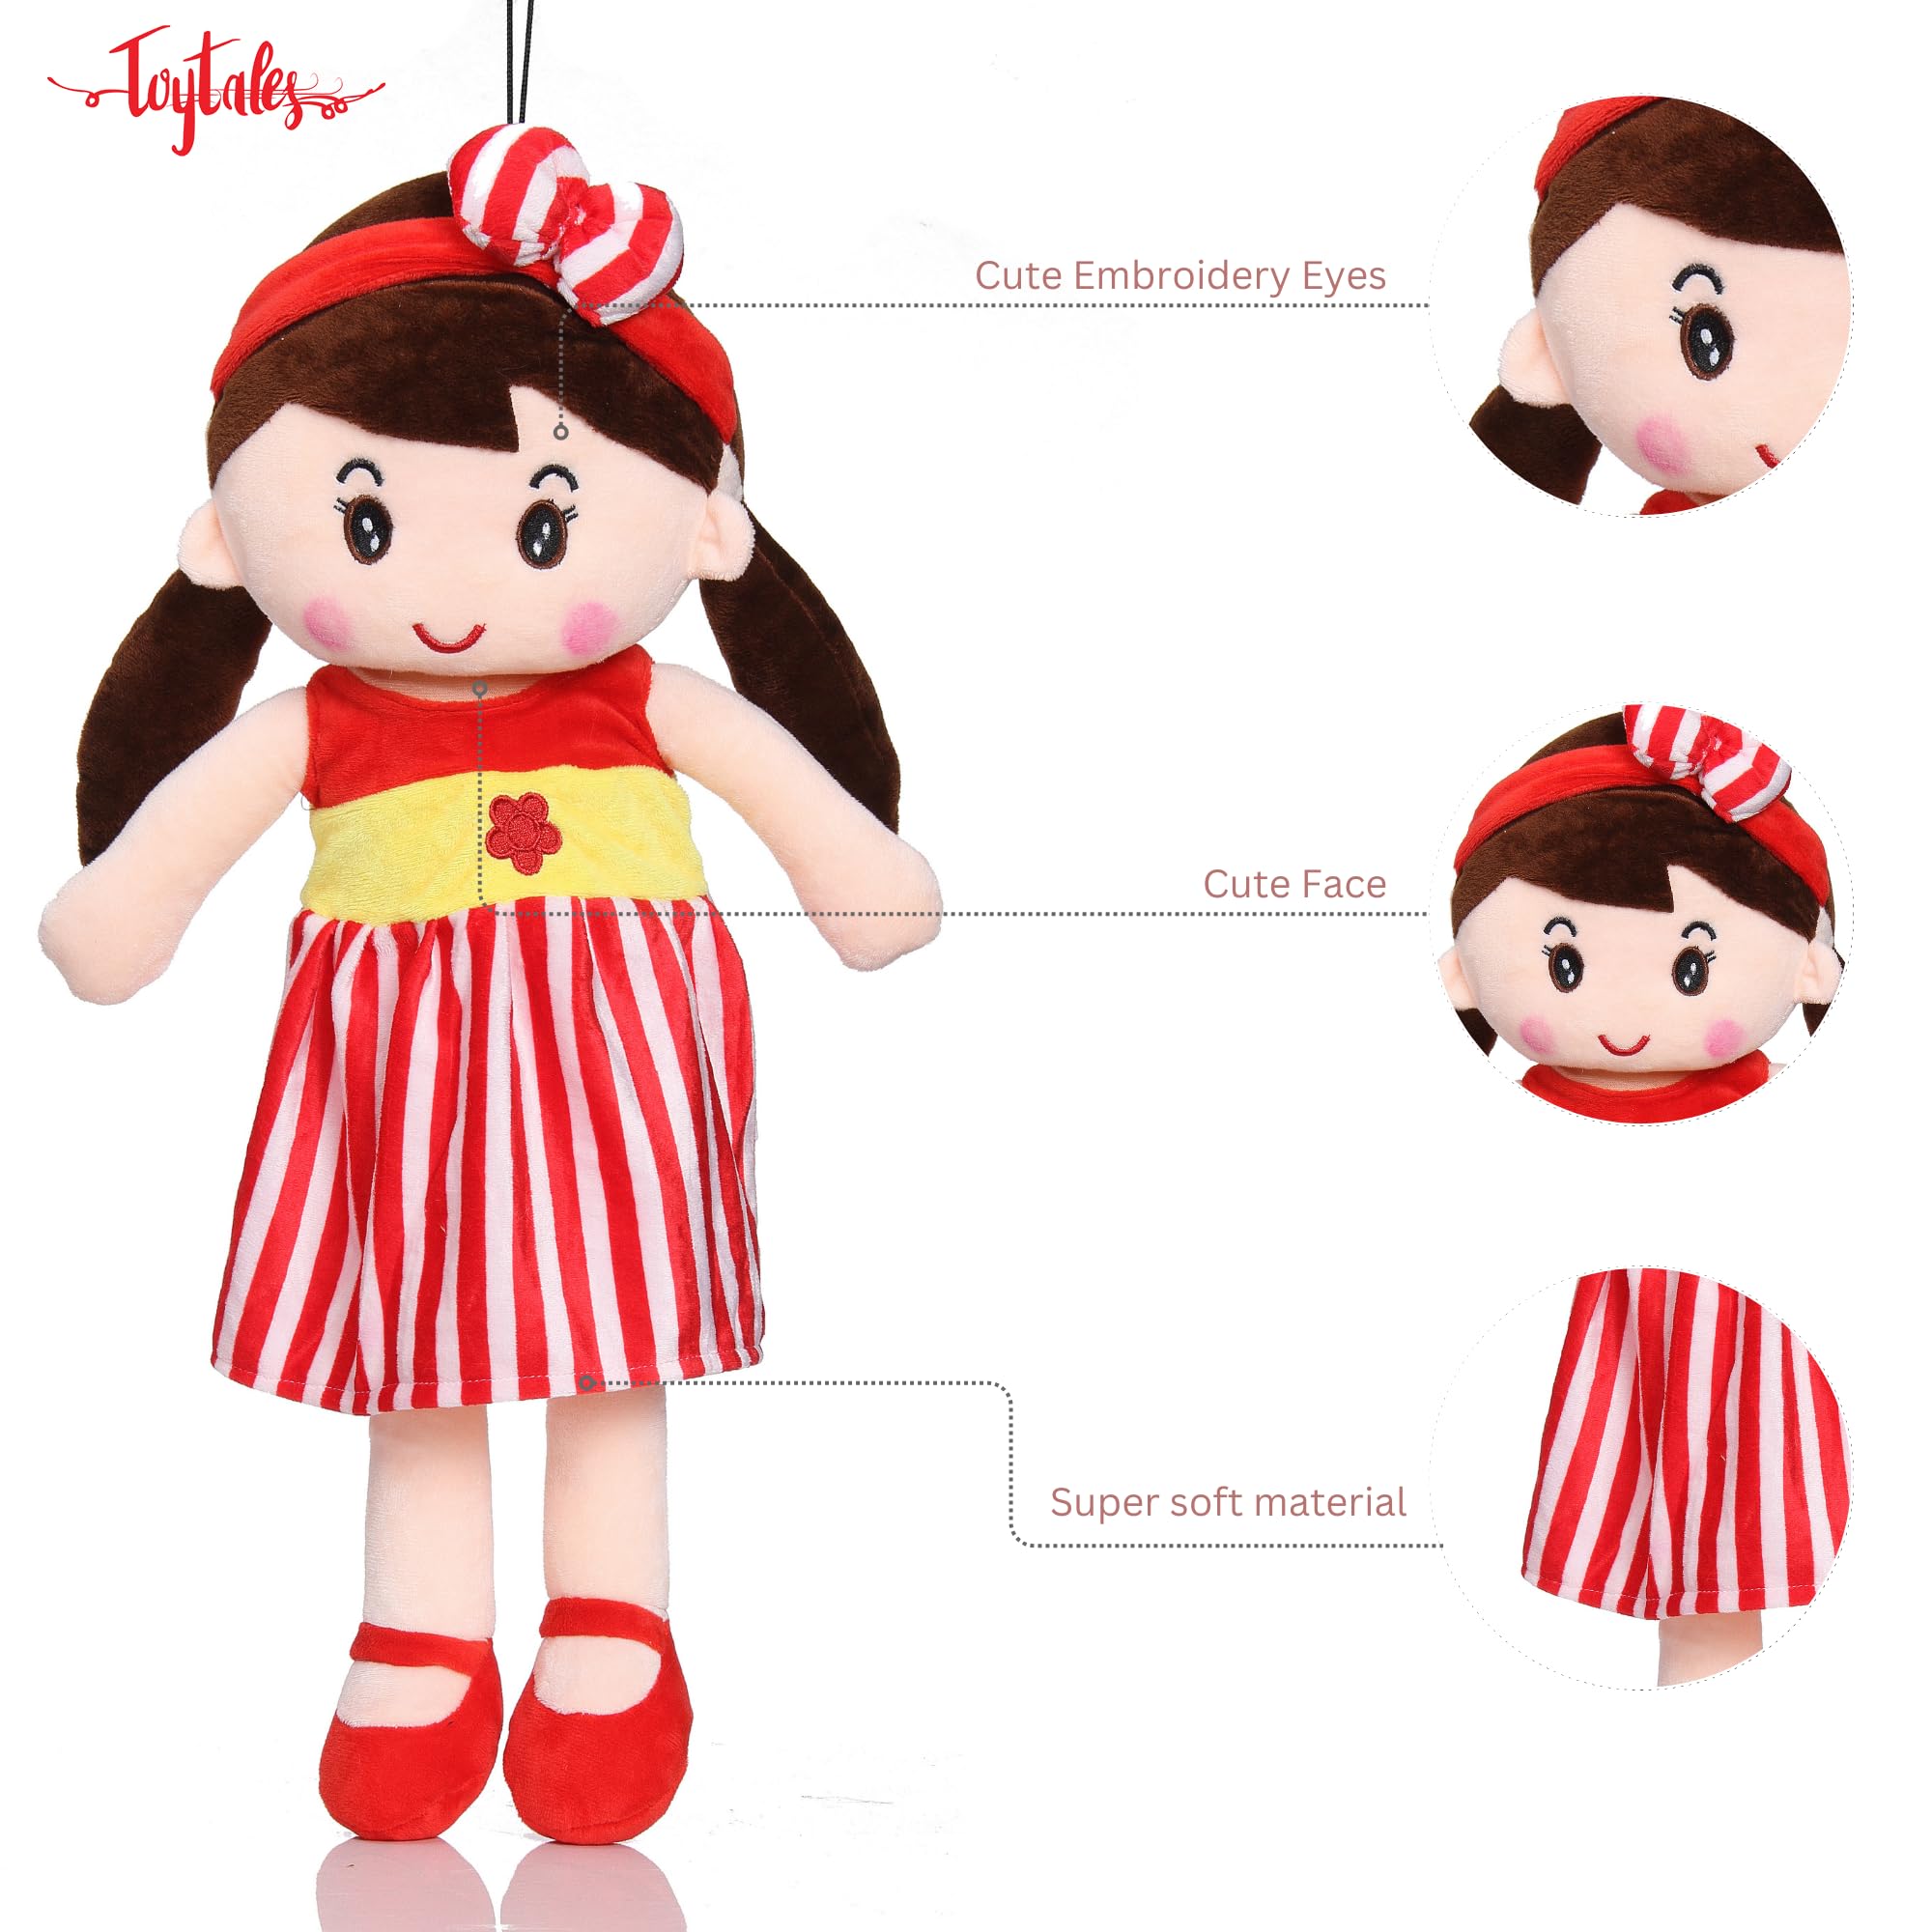 Cute Super Soft Stuffed Doll Small Size 40cm, Cuddly Squishy Dolls, Plush Toy for Baby Girls, Spark Imaginative Play, Safe & Fun Gift for Kids, Perfect for Playtime & Cuddling (Red)